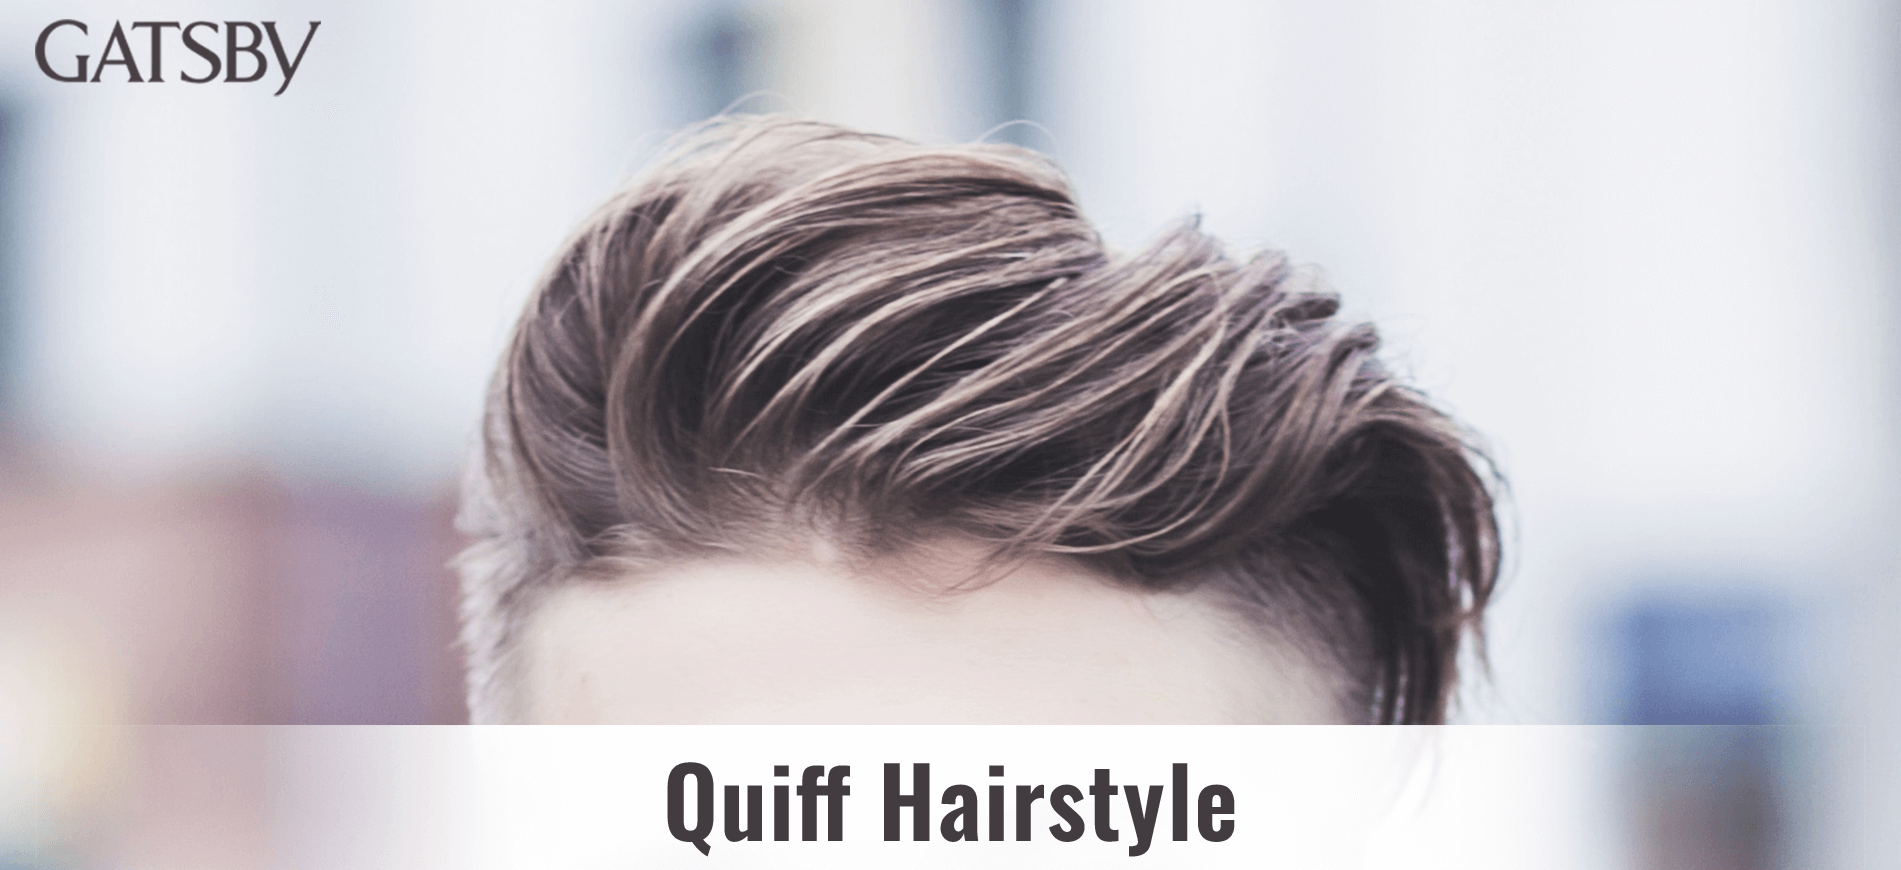 30 Business Haircuts for Men that Nail Every Professional Look